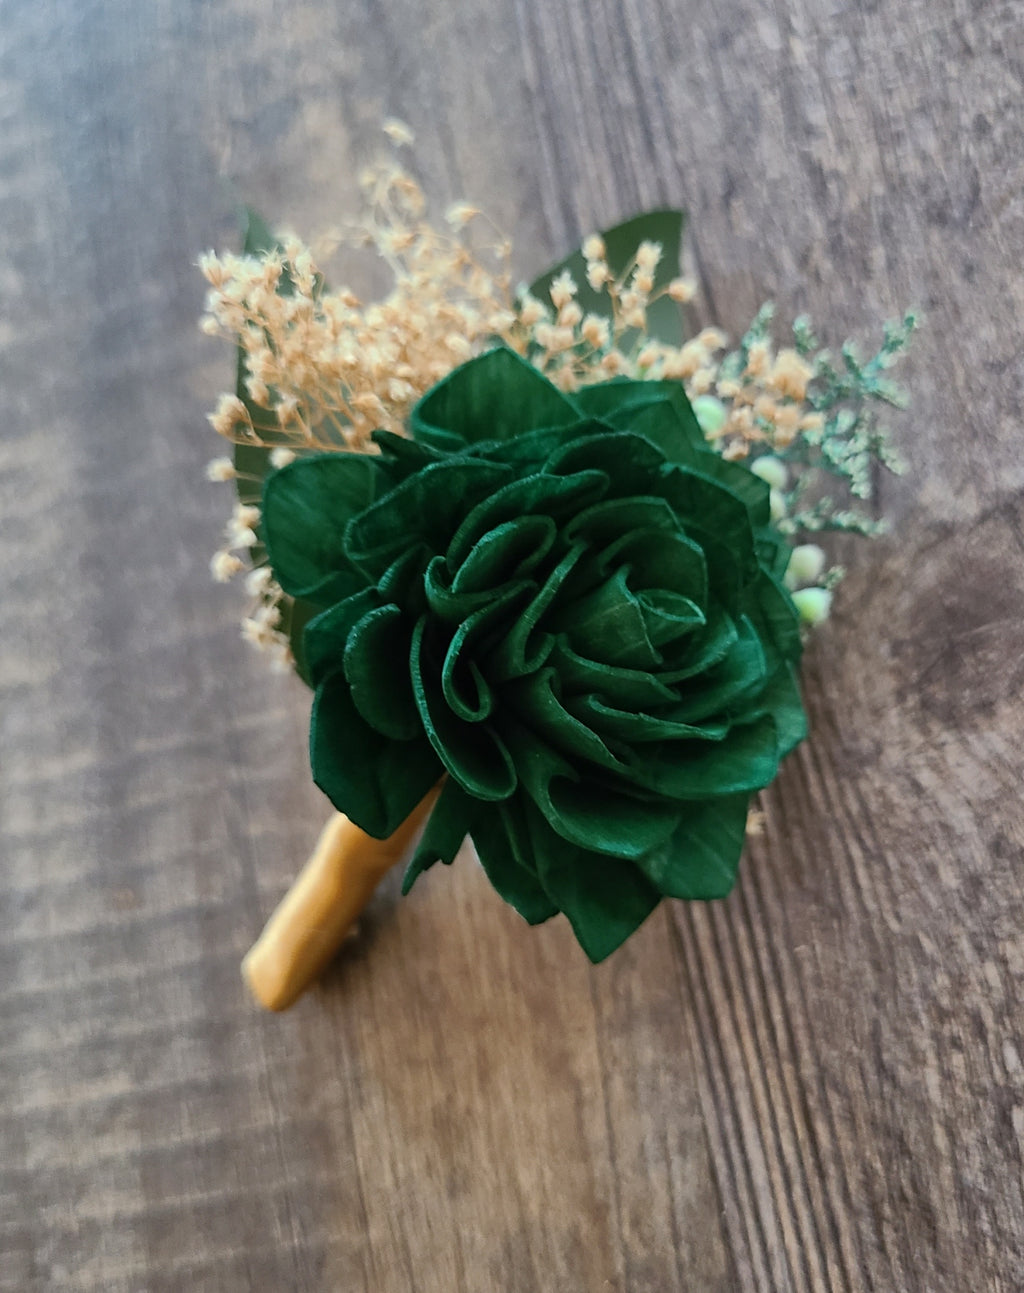 Emerald Green and Silver Wrist Corsage or Boutonnière 